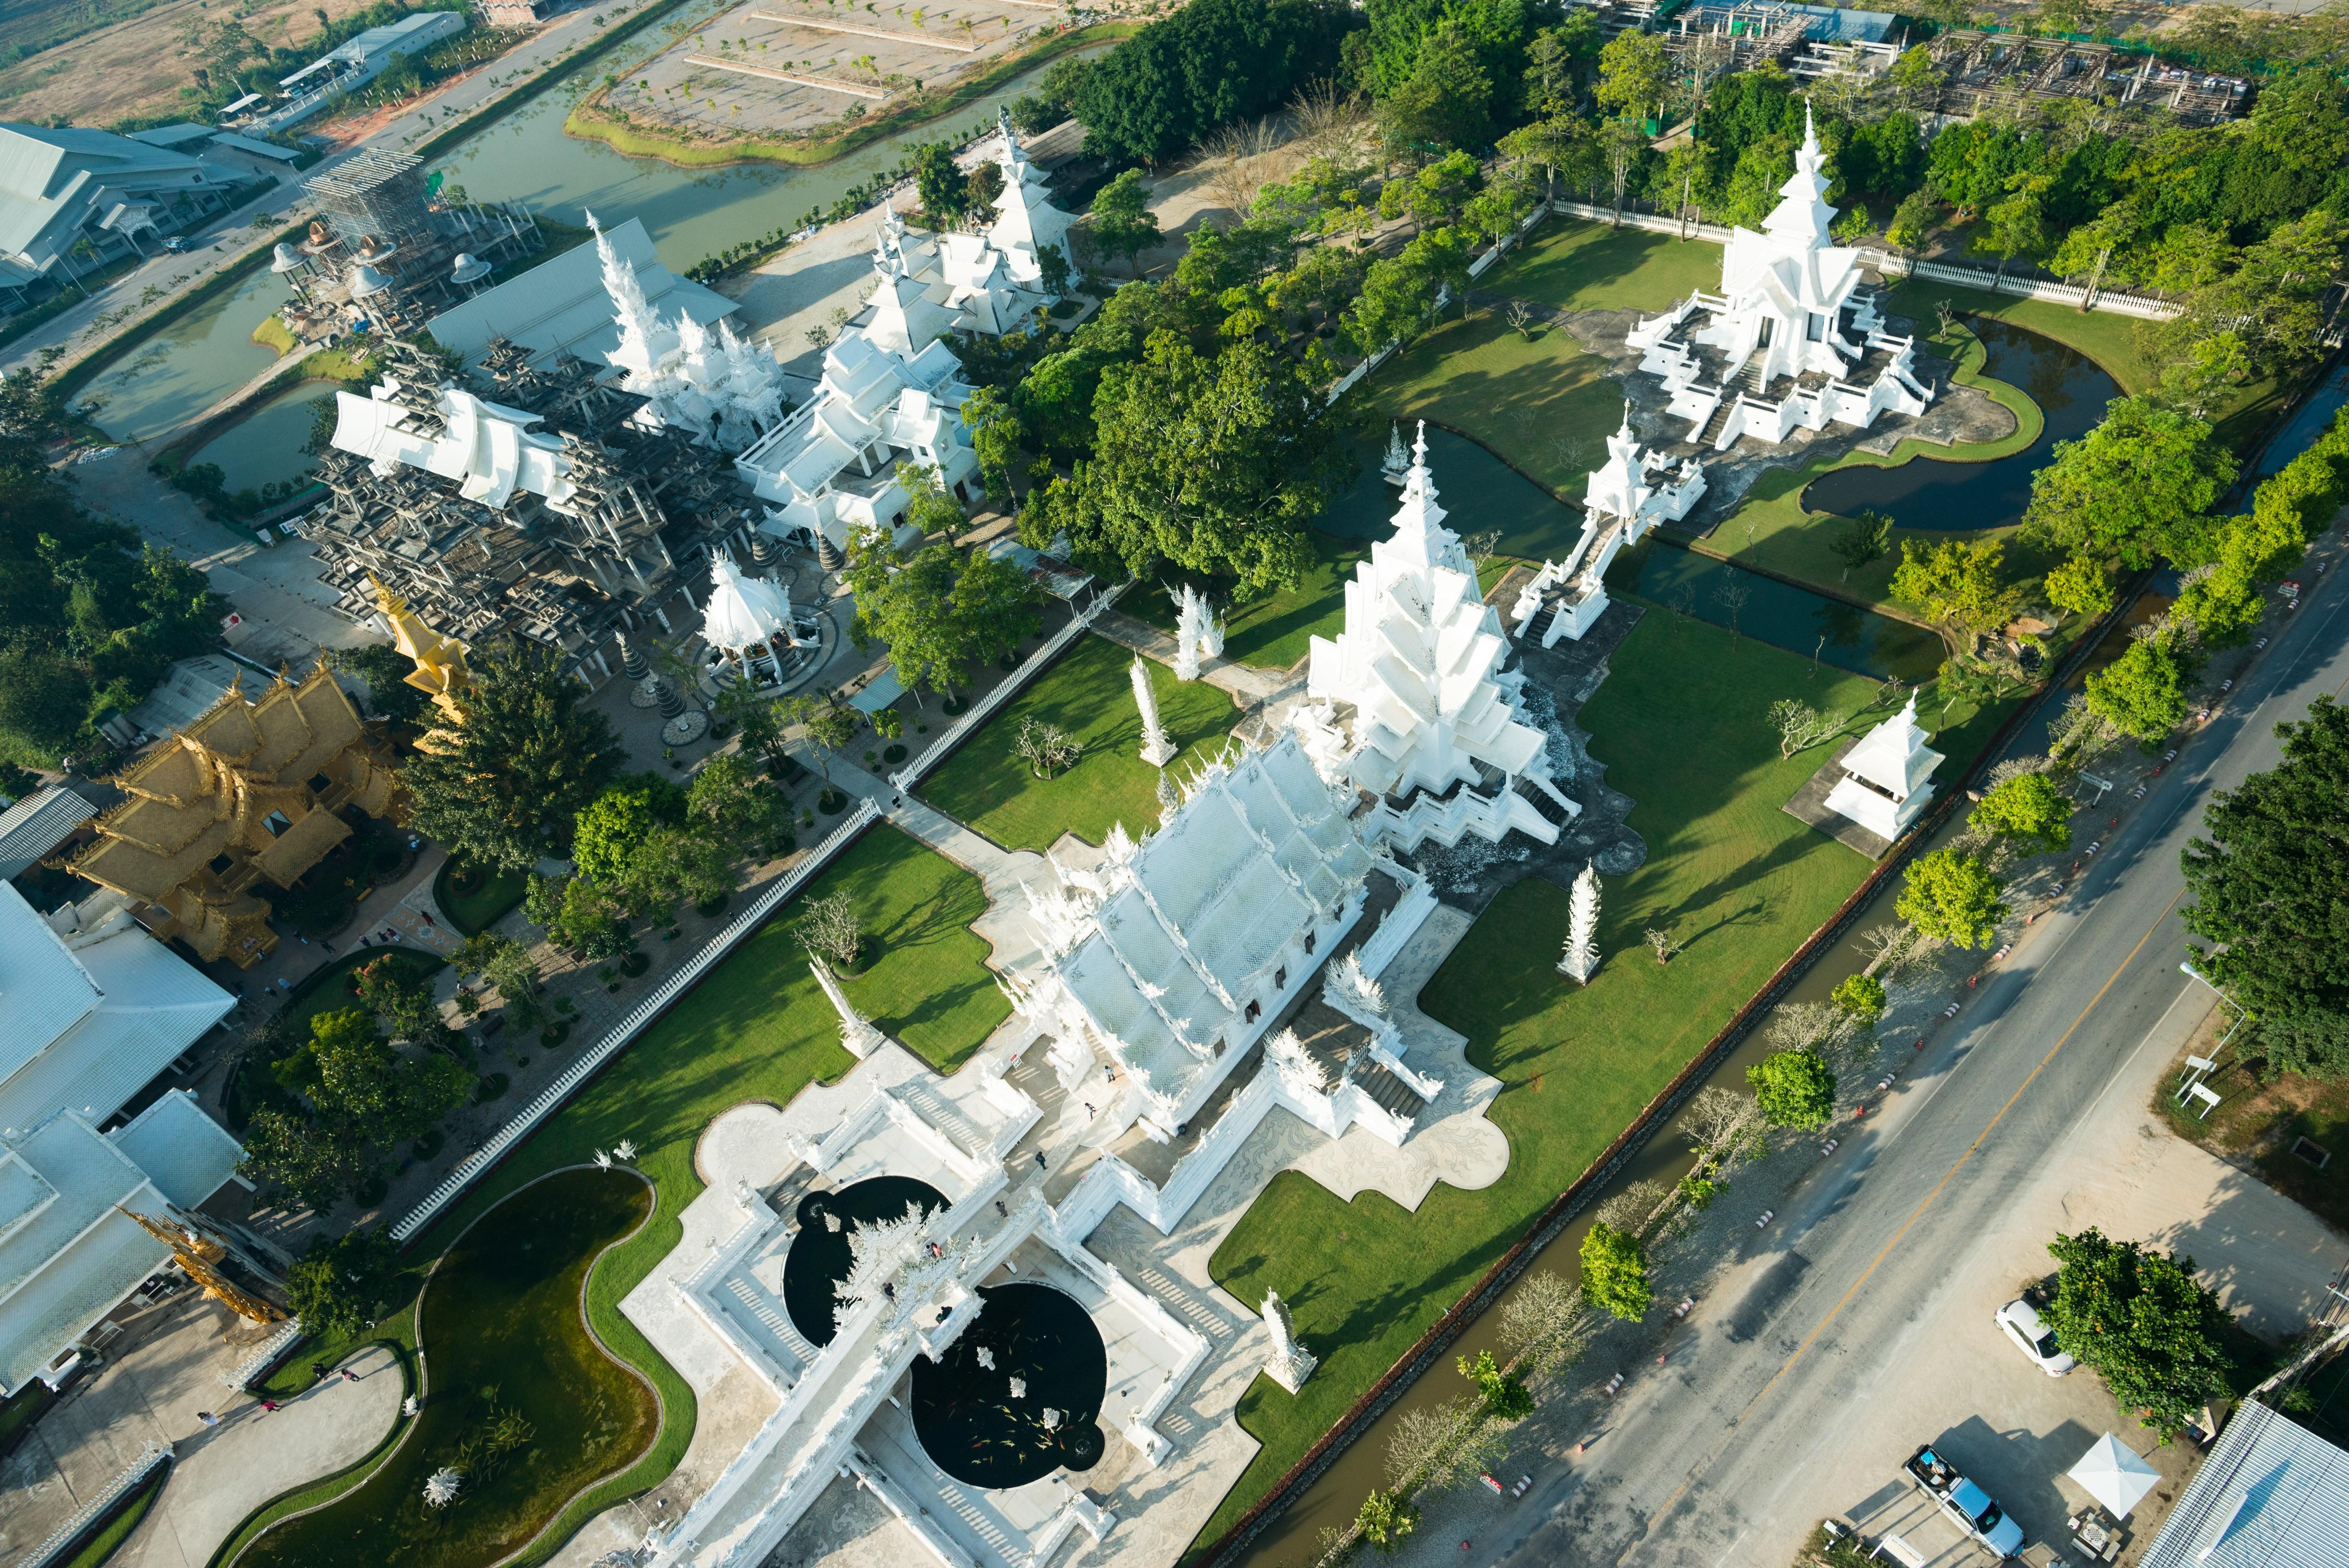 WAT RONG KHUN. The White Temple is a Buddhist temple in the Chiang Rai province. Photo courtesy of the Tourism Authority of Thailand 